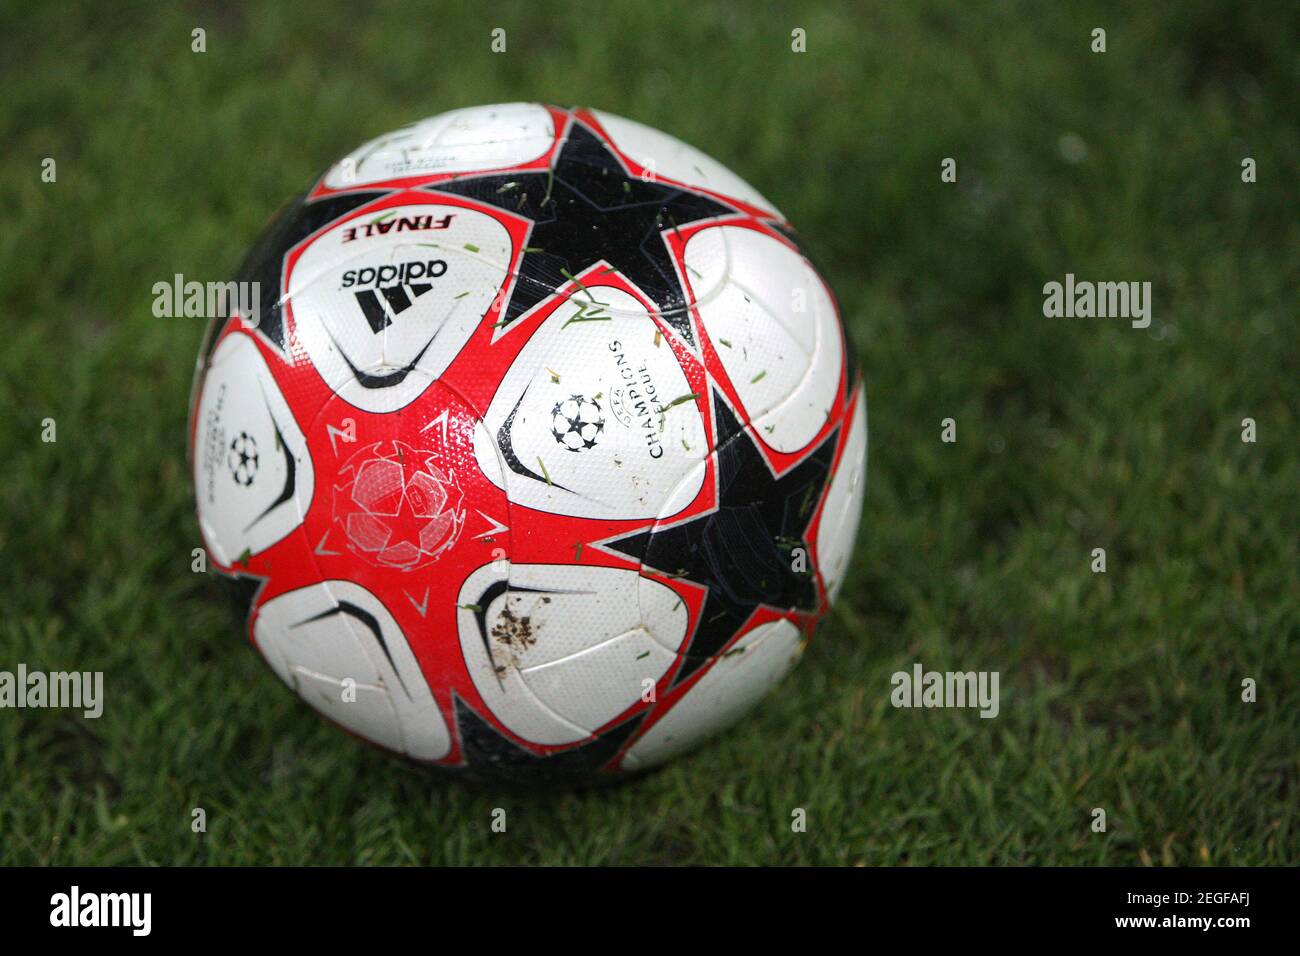 Football - Debreceni VSC v Liverpool - UEFA Champions League Group Stage  Matchday Five Group E - Budapest, Hungary - 09/10 - 24/11/09 General view /  Adidas Football Mandatory Credit: Action Images / Carl Recine Stock Photo -  Alamy